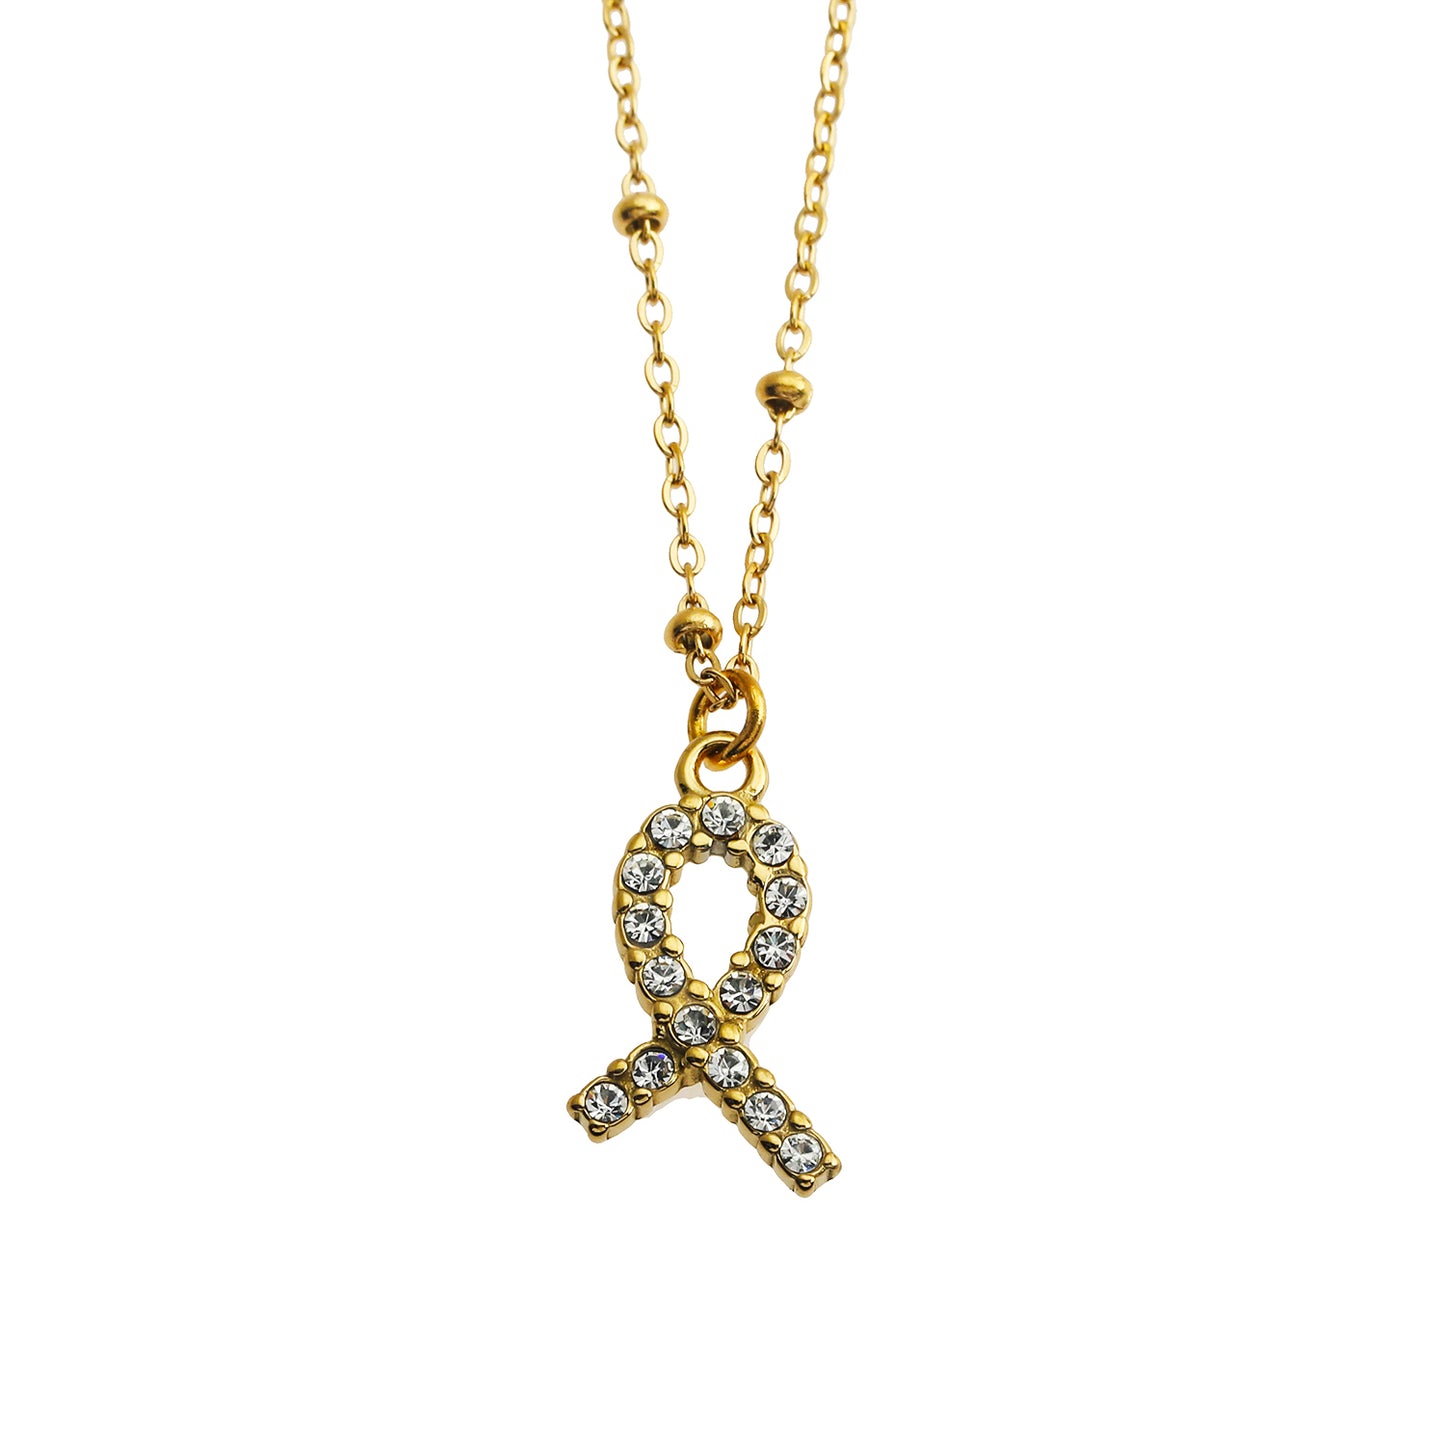 cancer-survivor-necklace | fight-cancer-jewellery | cancer-survivor-jewellery | hackney-nine | hackneynine | necklace | hoops | bracelets | earrings | charms | studs_earrings | jewellery | jewellery-store | shop-jewelry | gold-jewellery | silver-jewellery | dressy_jewellery | classy_ jewellery | on_trend_jewellery | fashion_ jewellery | cool_jewellery | affordable_jewellery | designer_jewellery | vintage_jeweler | gifts-for-her | gifts-for-mum | gifts-for-girls | gifts-for-females | zirconia